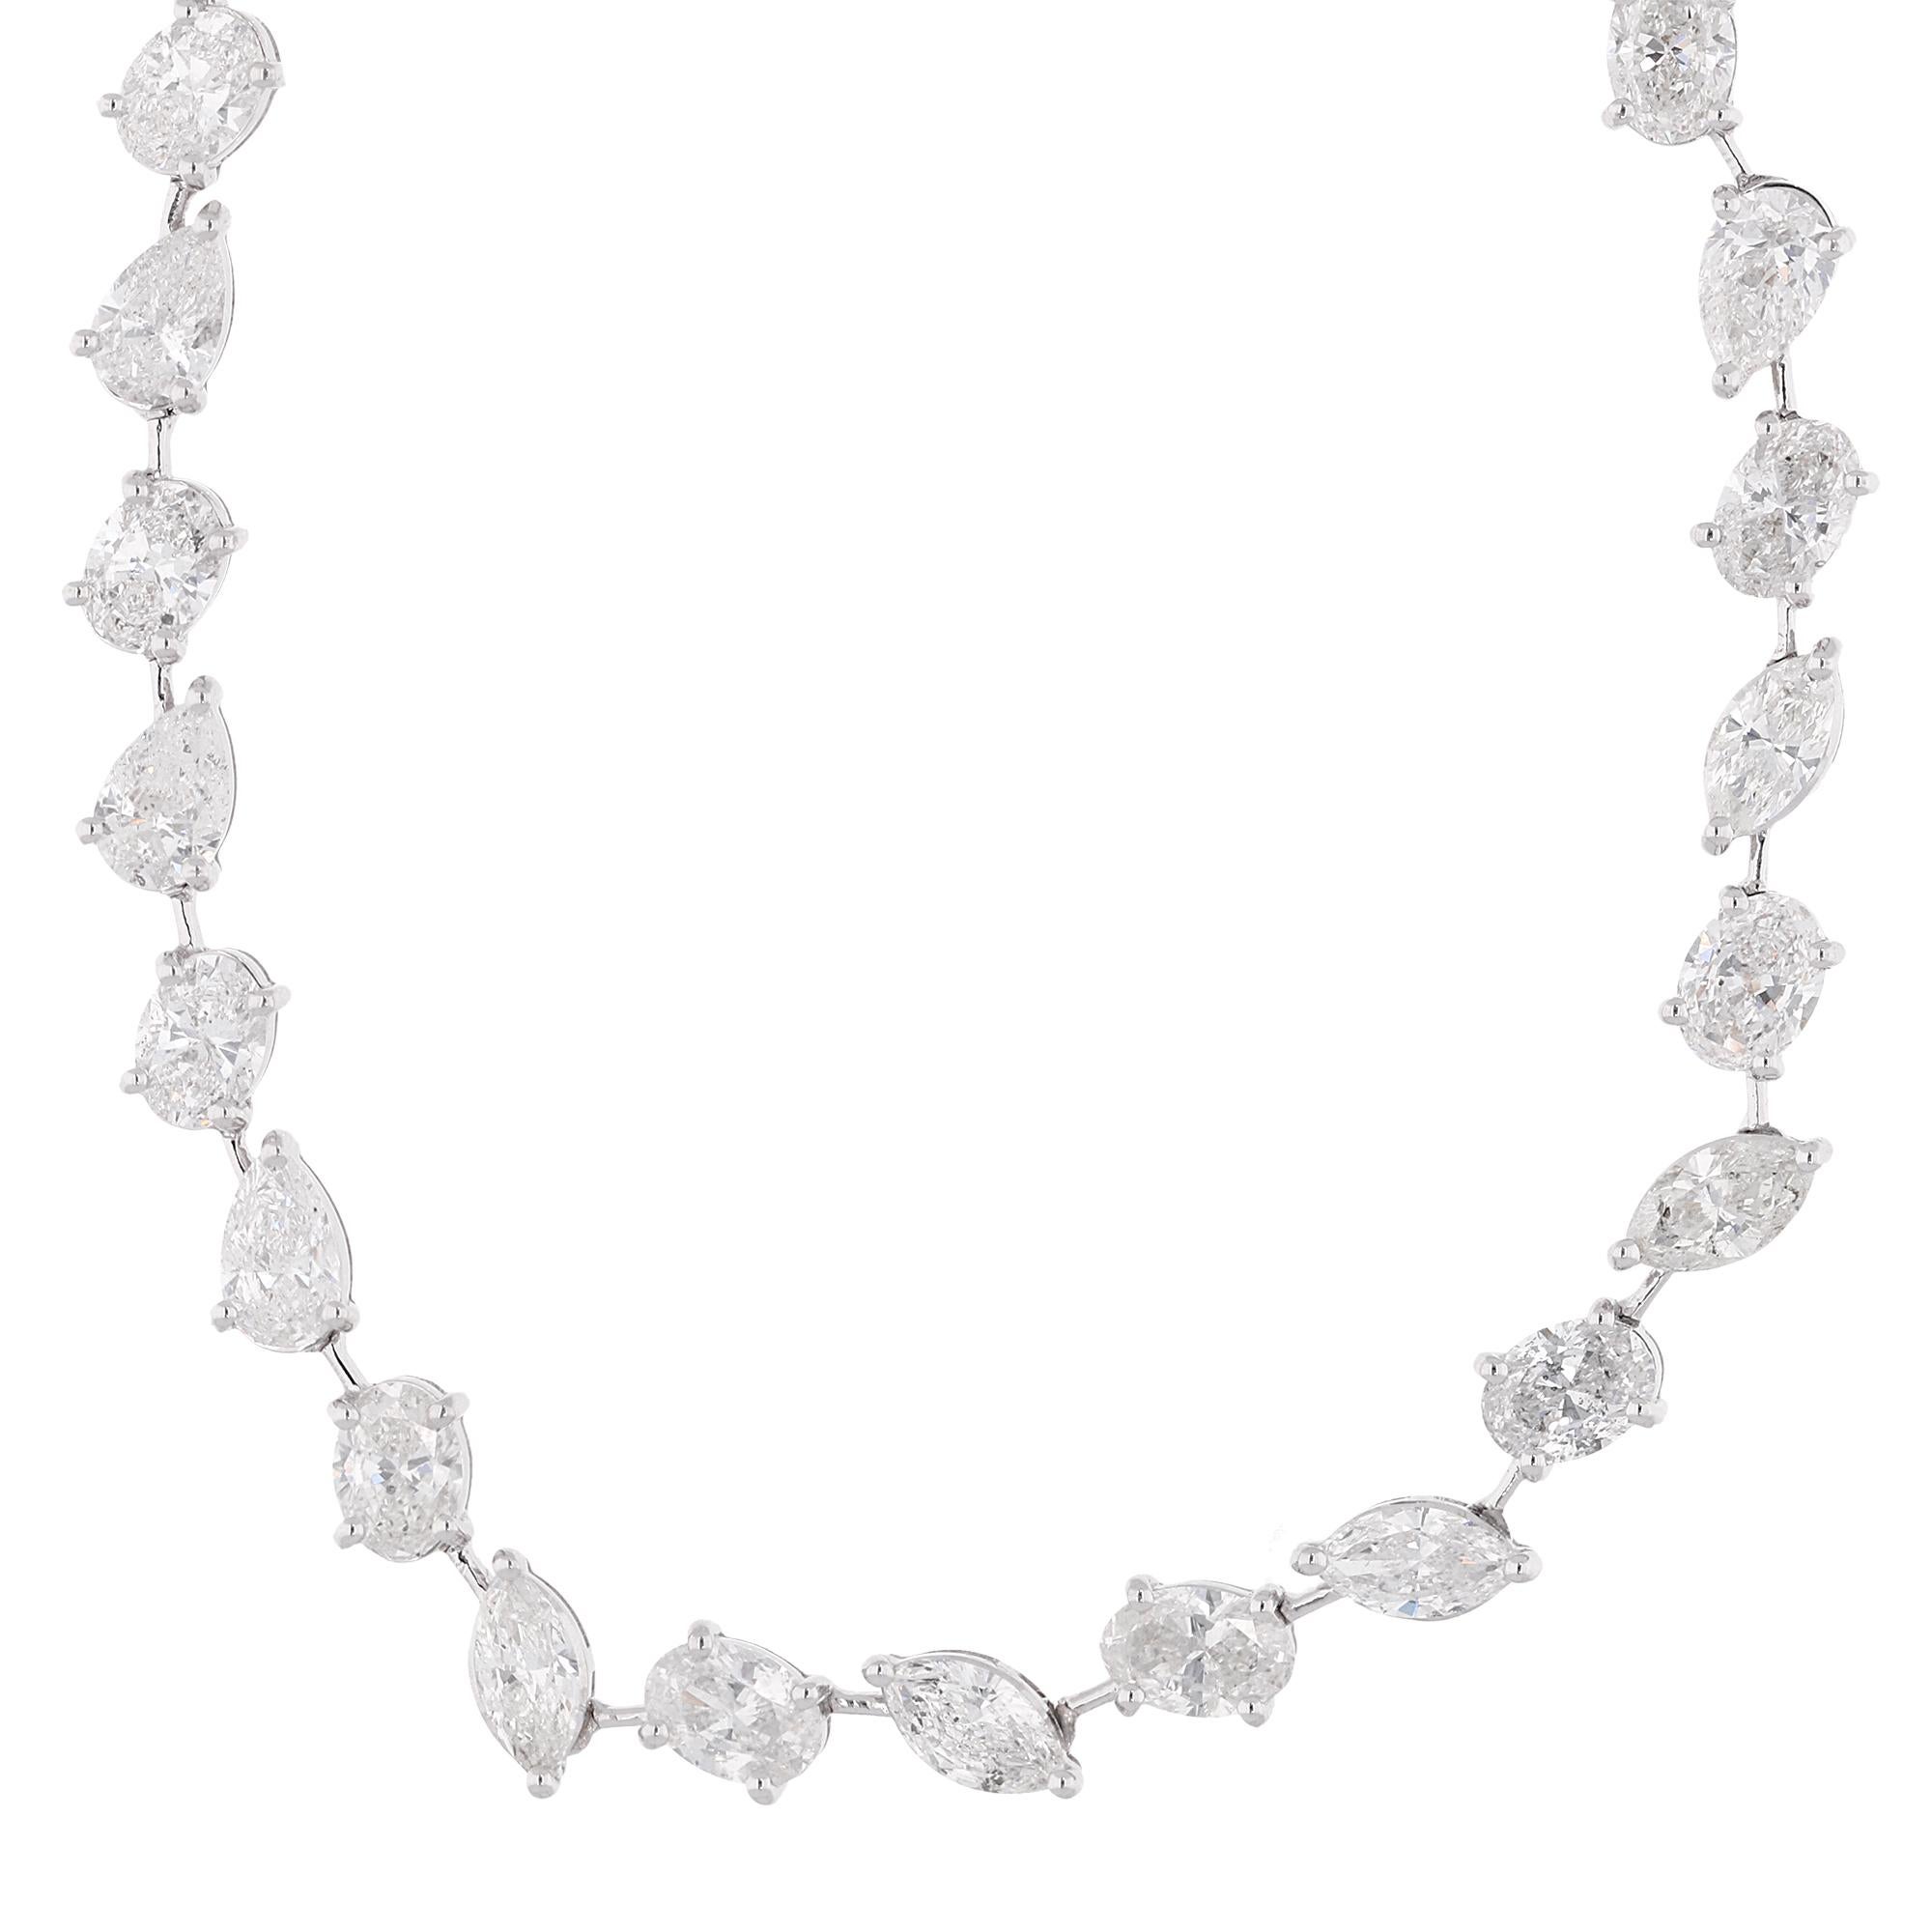 The focal point of this necklace is the stunning collection of diamonds, totaling an impressive 9.80 carats. Each diamond is carefully selected for its exceptional quality, boasting SI clarity that indicates slight inclusions visible under 10x